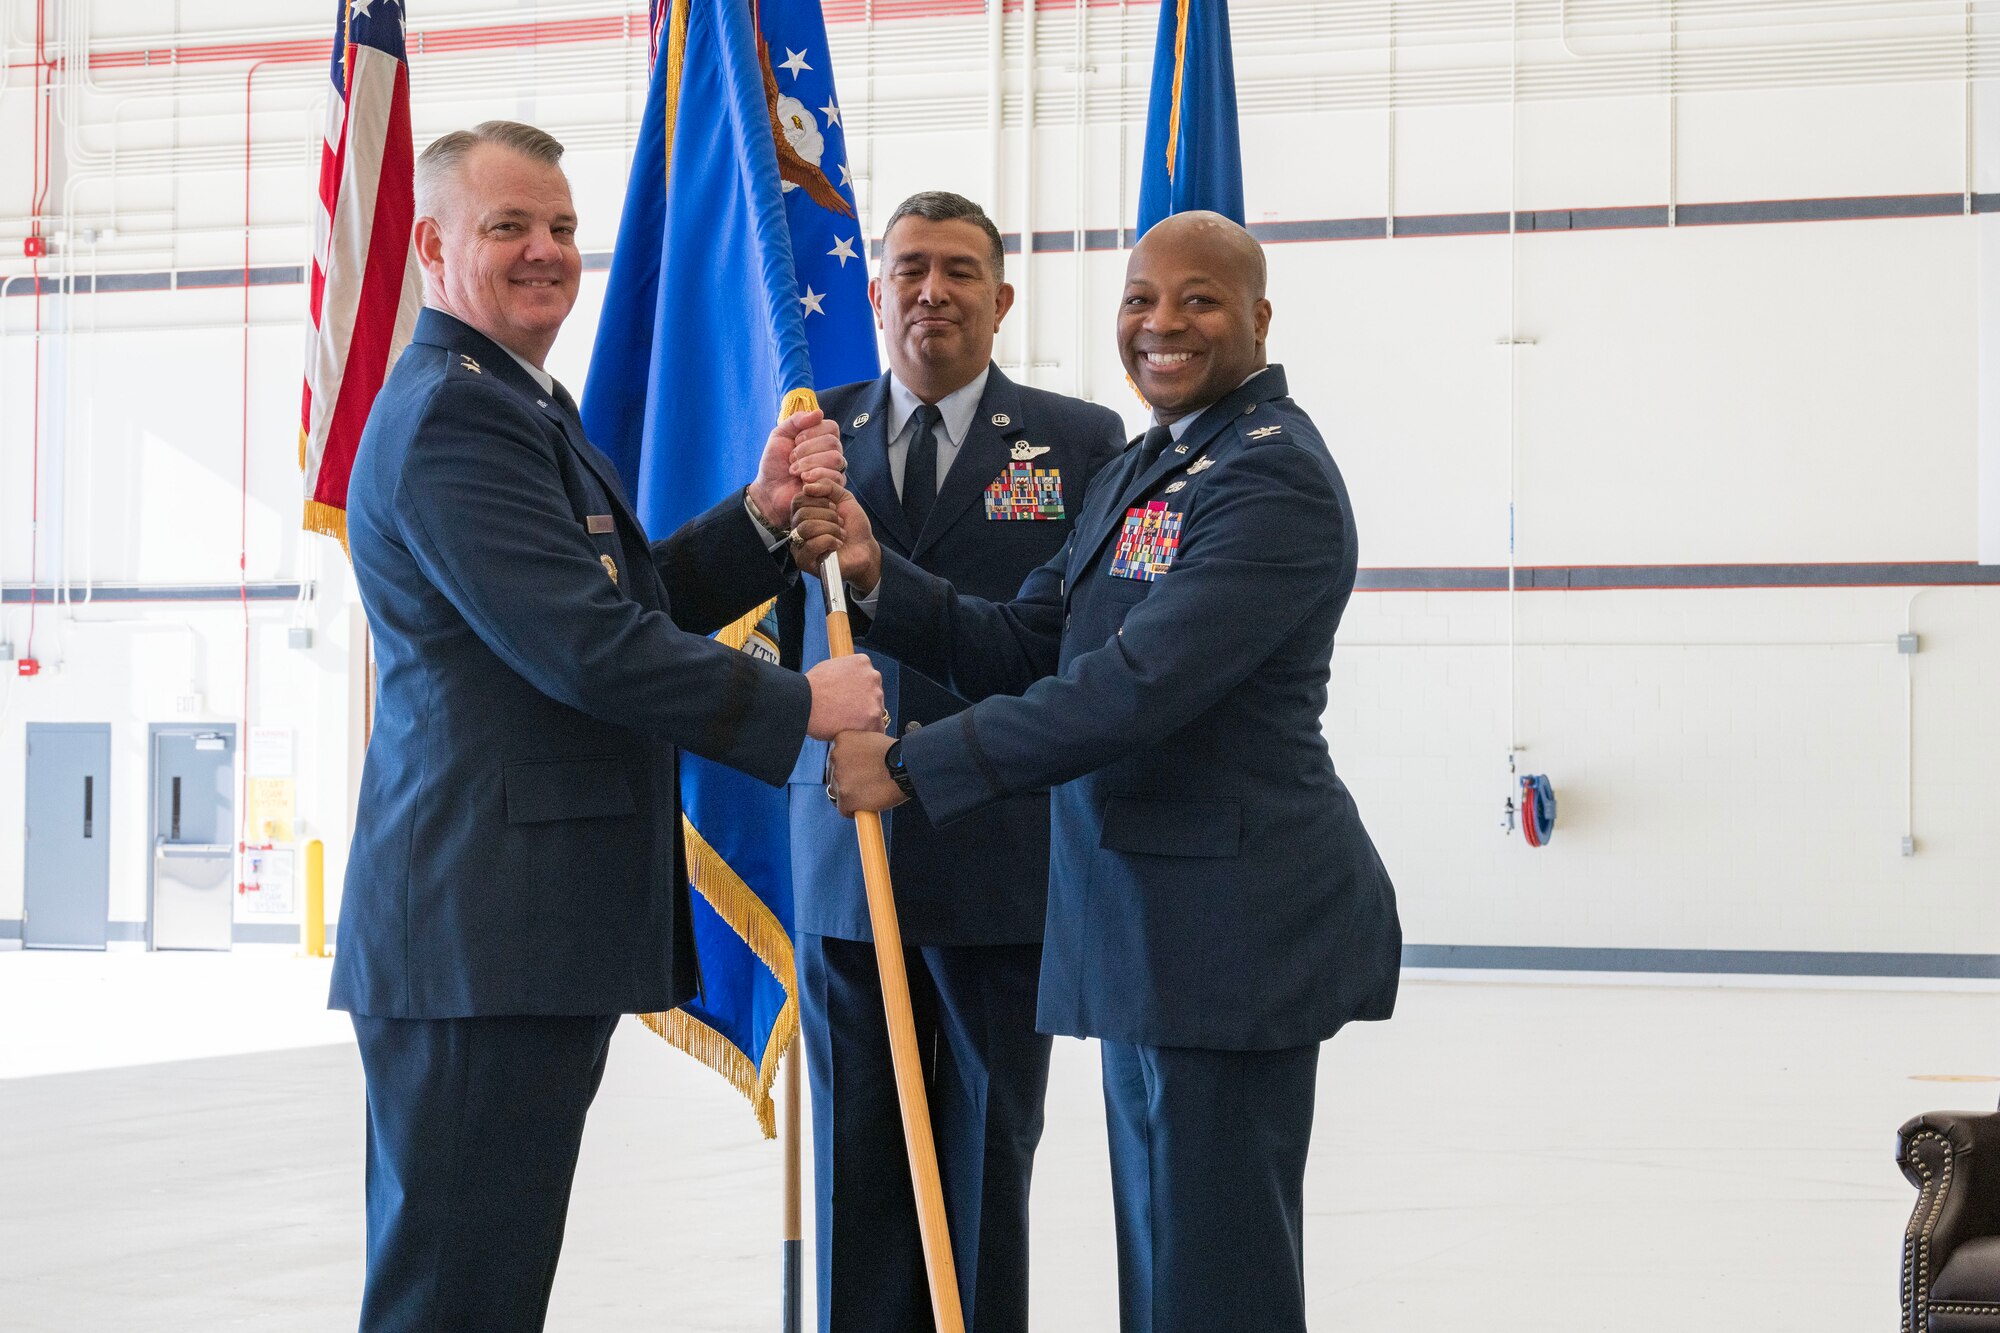 Maj. Gen. D. Scott Durham, 4th Air Force commander, passes the guidon to Col. Patrick L. Brady-Lee (right) as he assumes command of the 349th Air Mobility Wing on January 7, 2024, at Travis Air Force Base, California. (US Air Force photo by Tech. Sgt. Ryan Green)